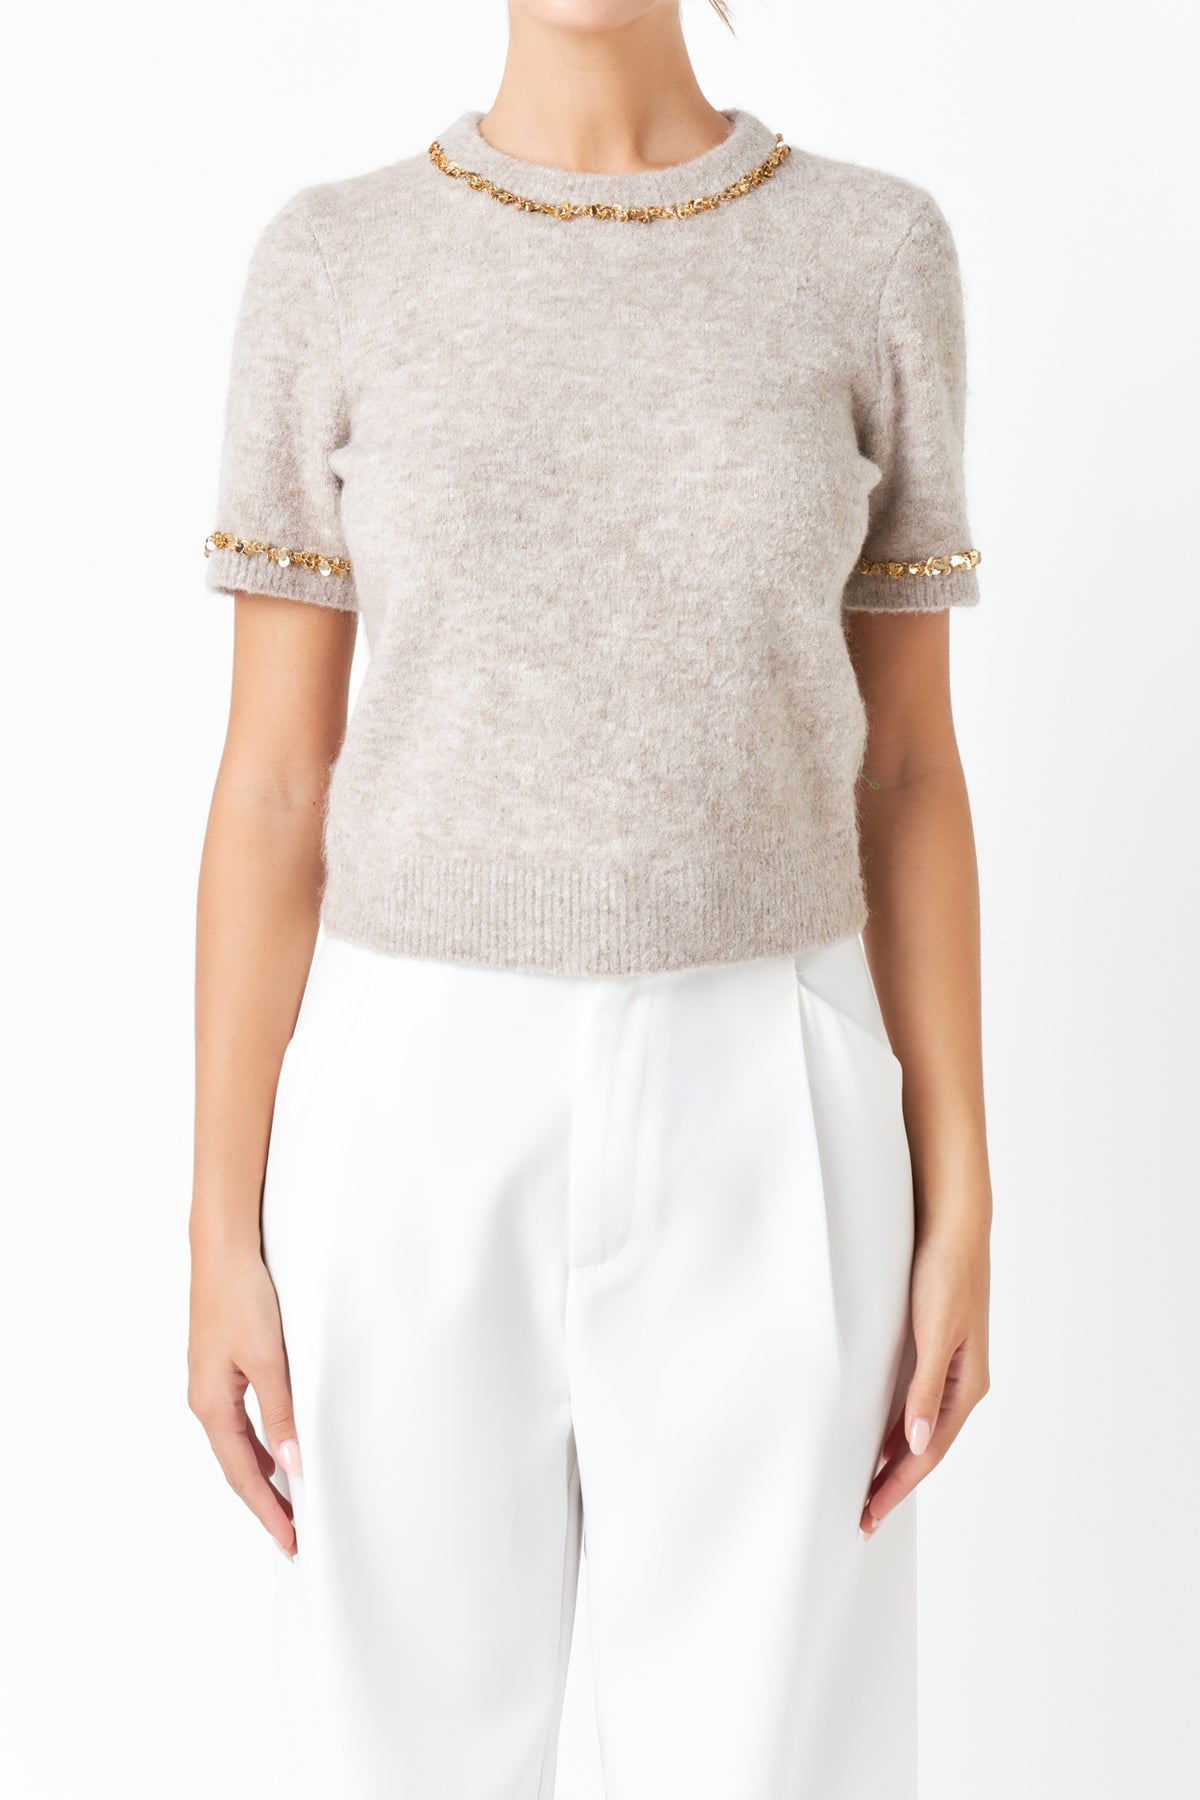 ENDLESS ROSE - Trimmed Knit Short Sleeve Top - TOPS available at Objectrare